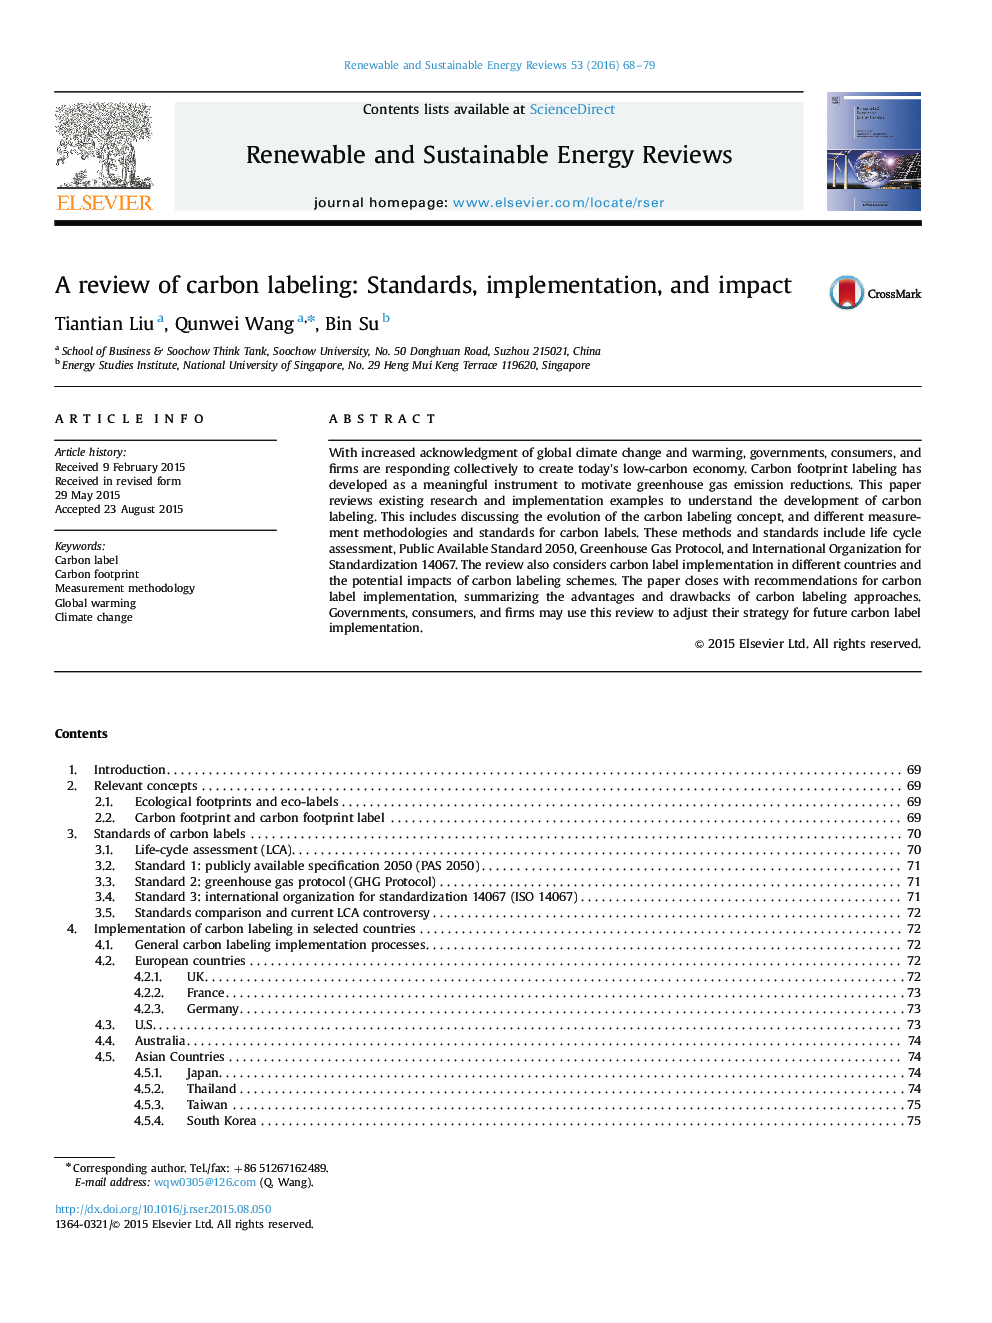 A review of carbon labeling: Standards, implementation, and impact